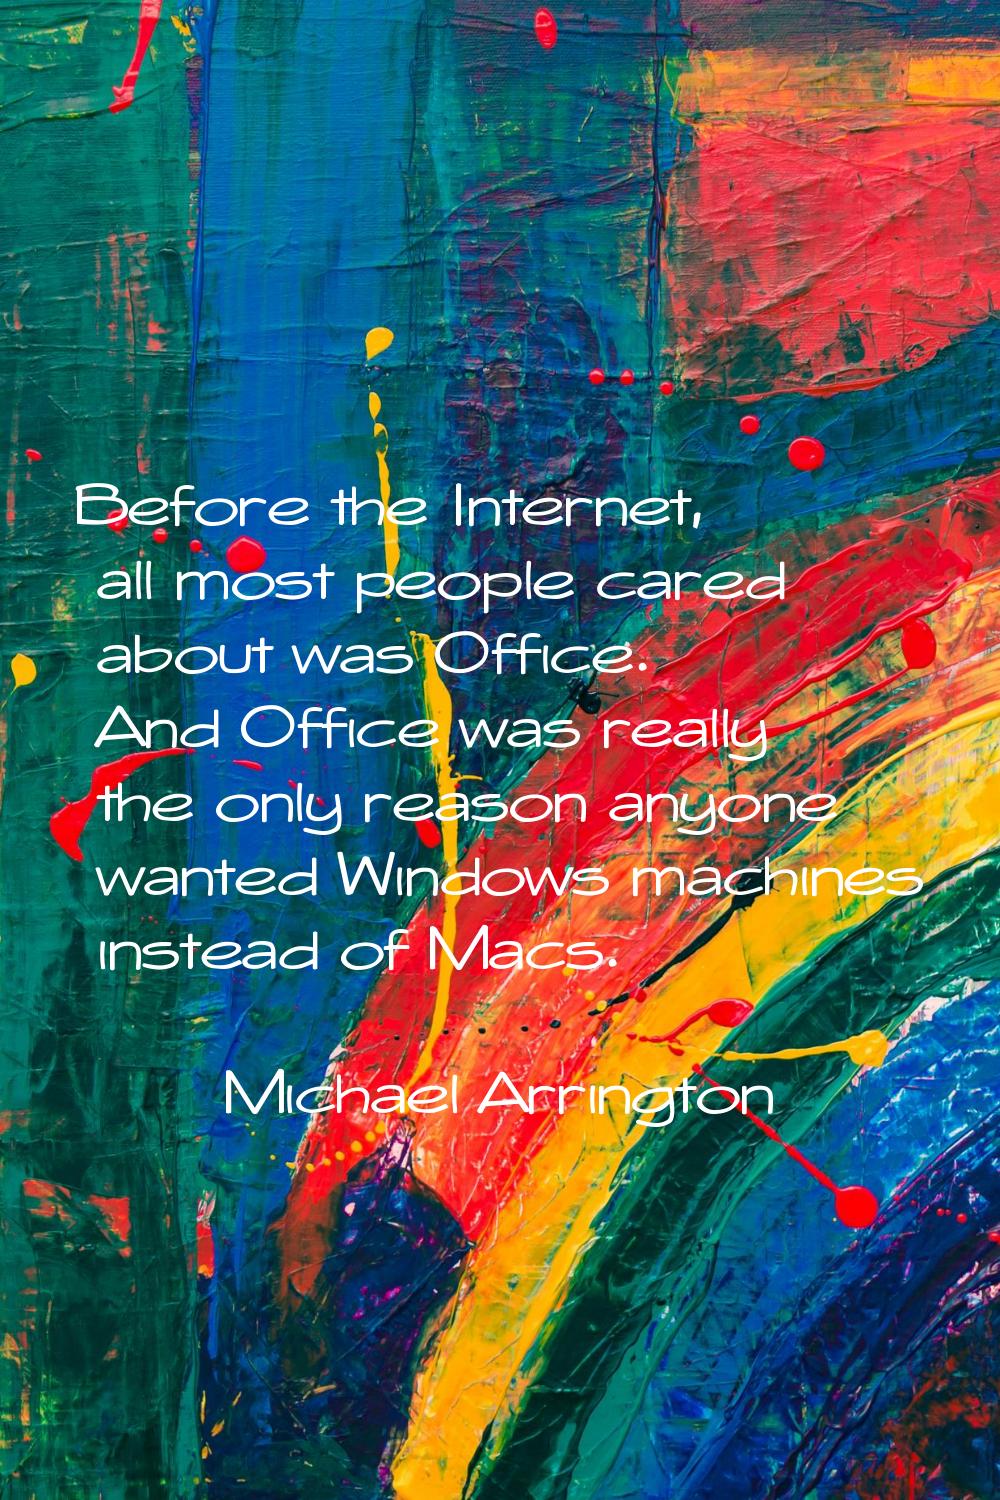 Before the Internet, all most people cared about was Office. And Office was really the only reason 